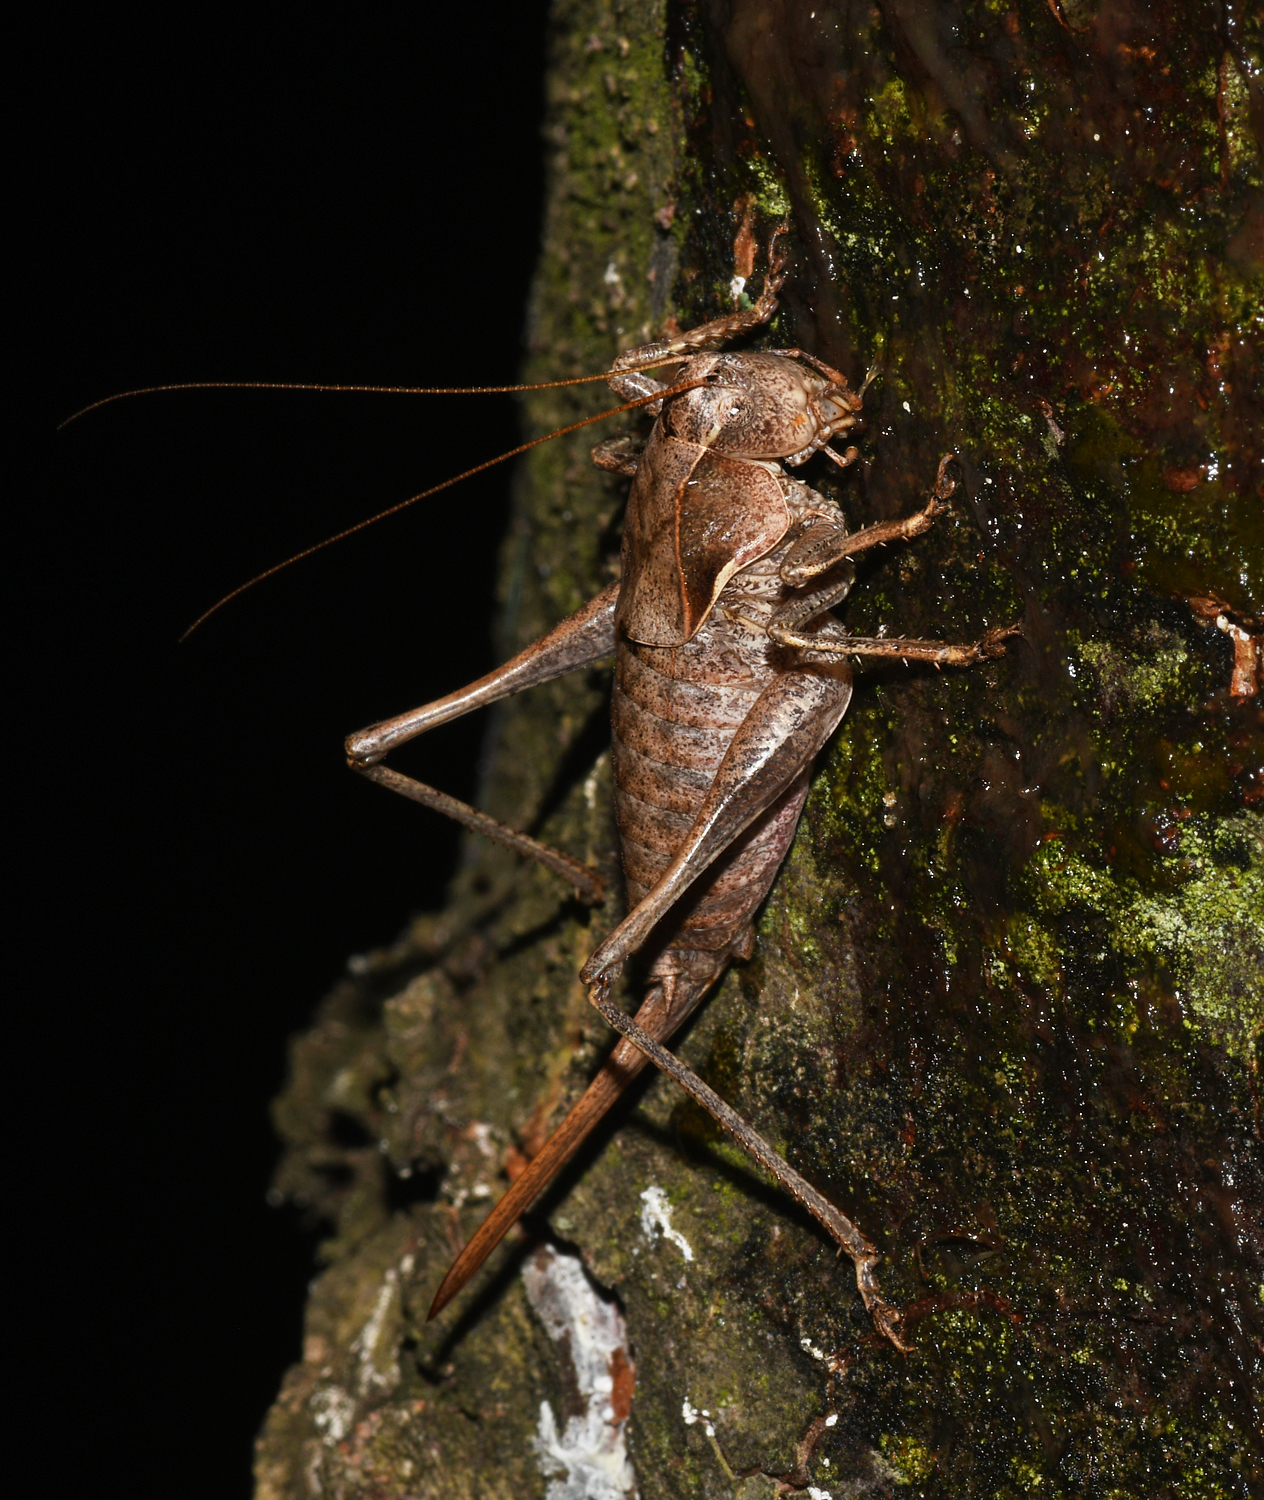 Ontario endangered species: A Davis's shieldback cricket on a tree trunk at nighttime